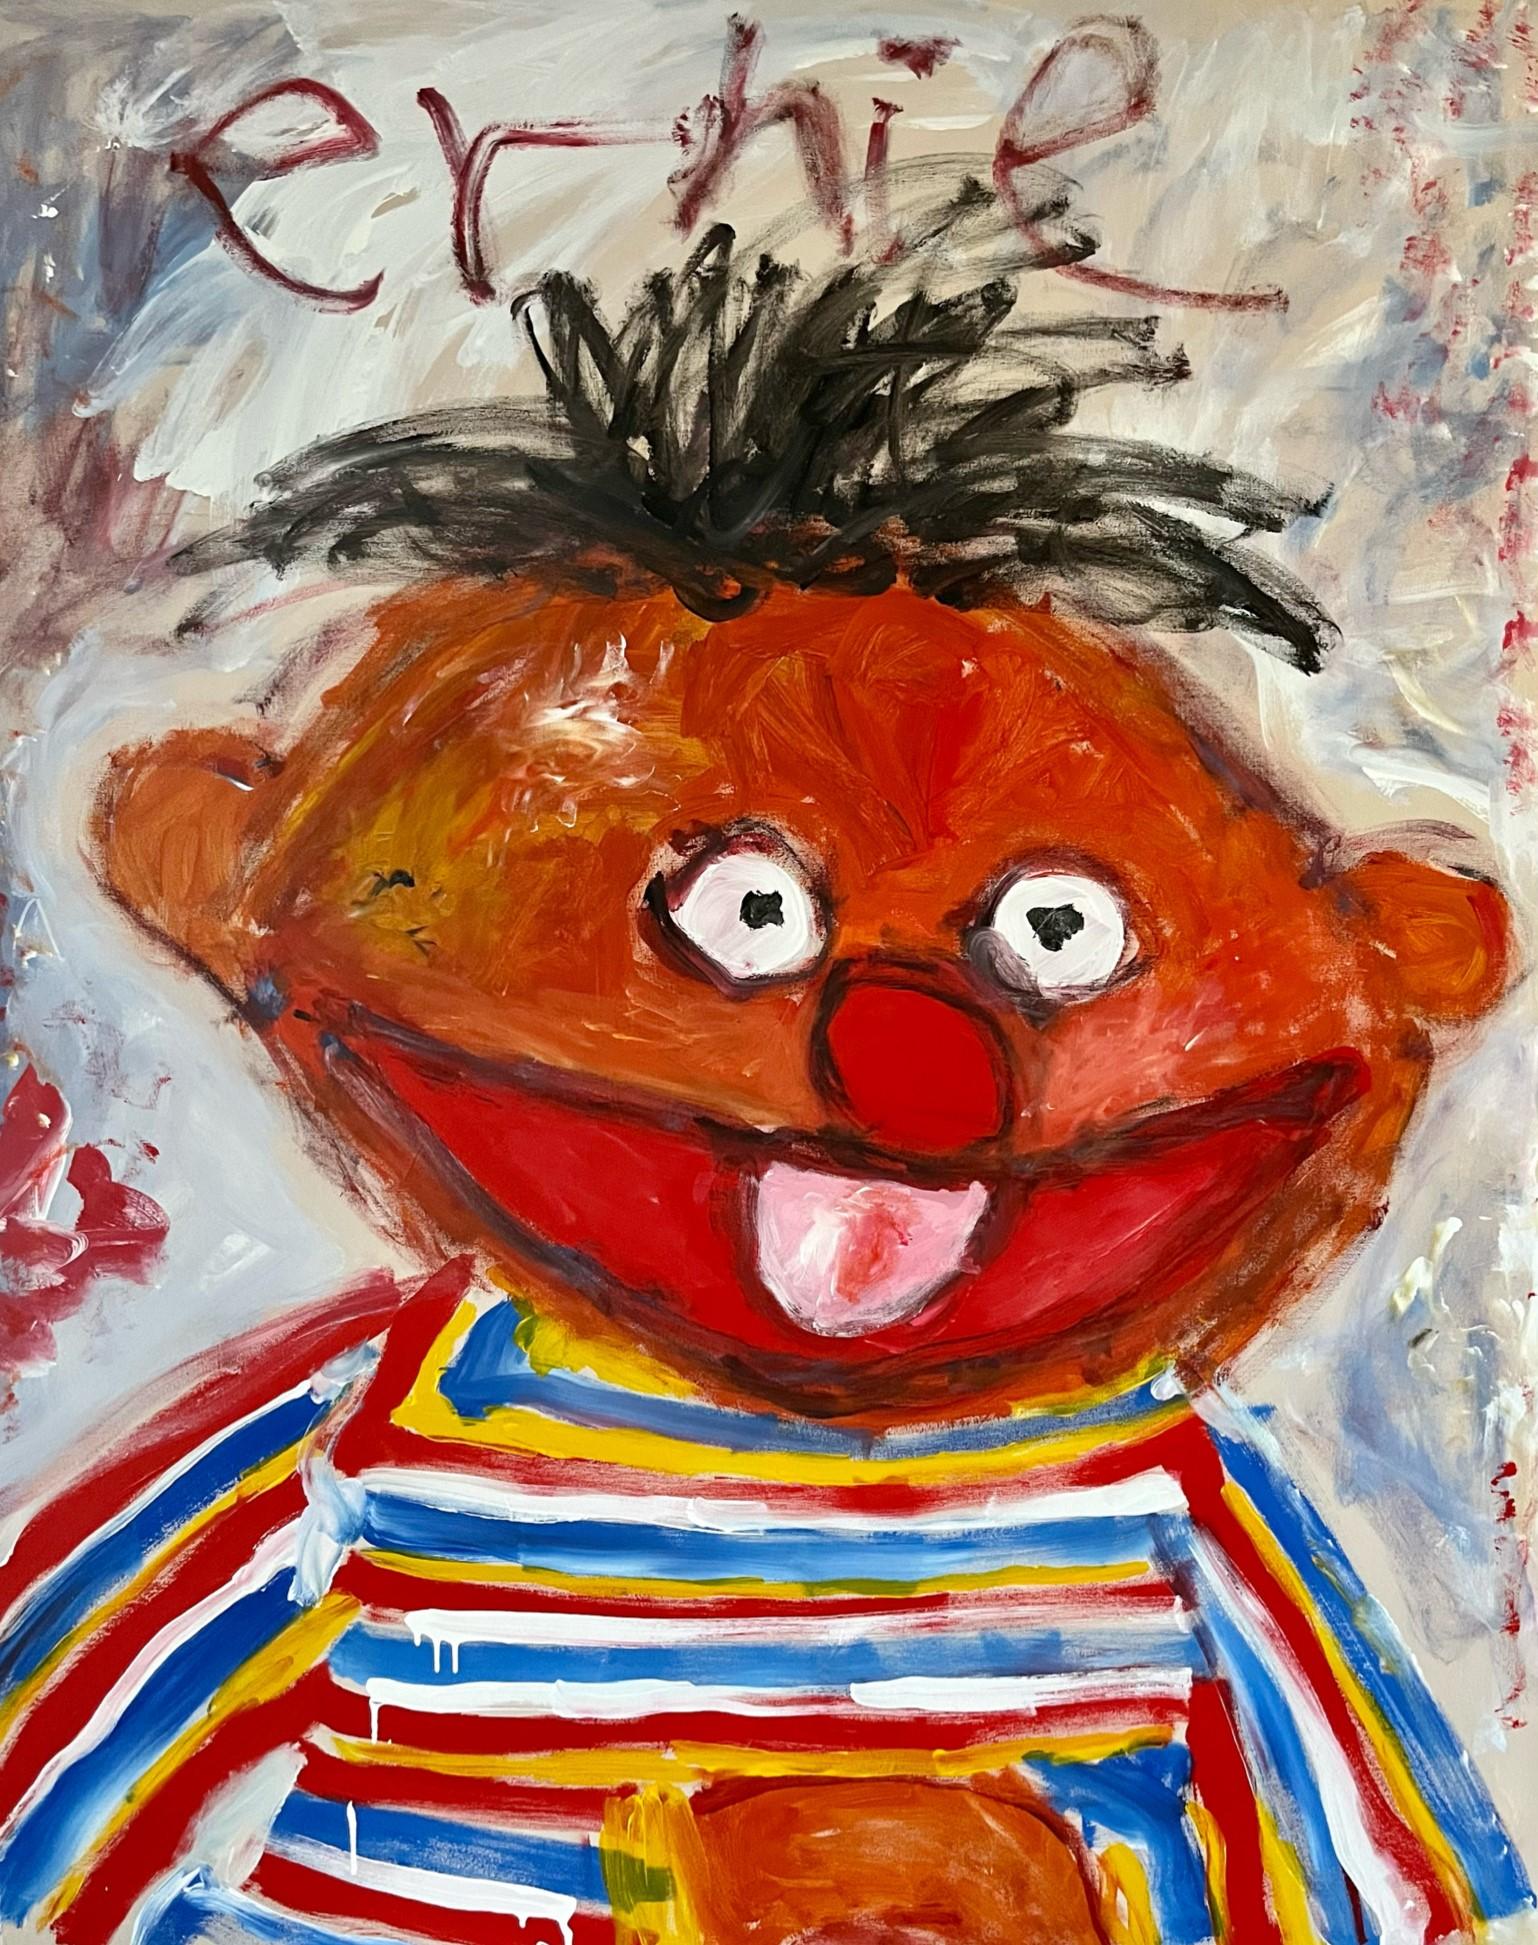 Tyler Casey Abstract Painting - "Ernie" Contemporary Abstract Pop Art Figure Painting of Sesame Street Character